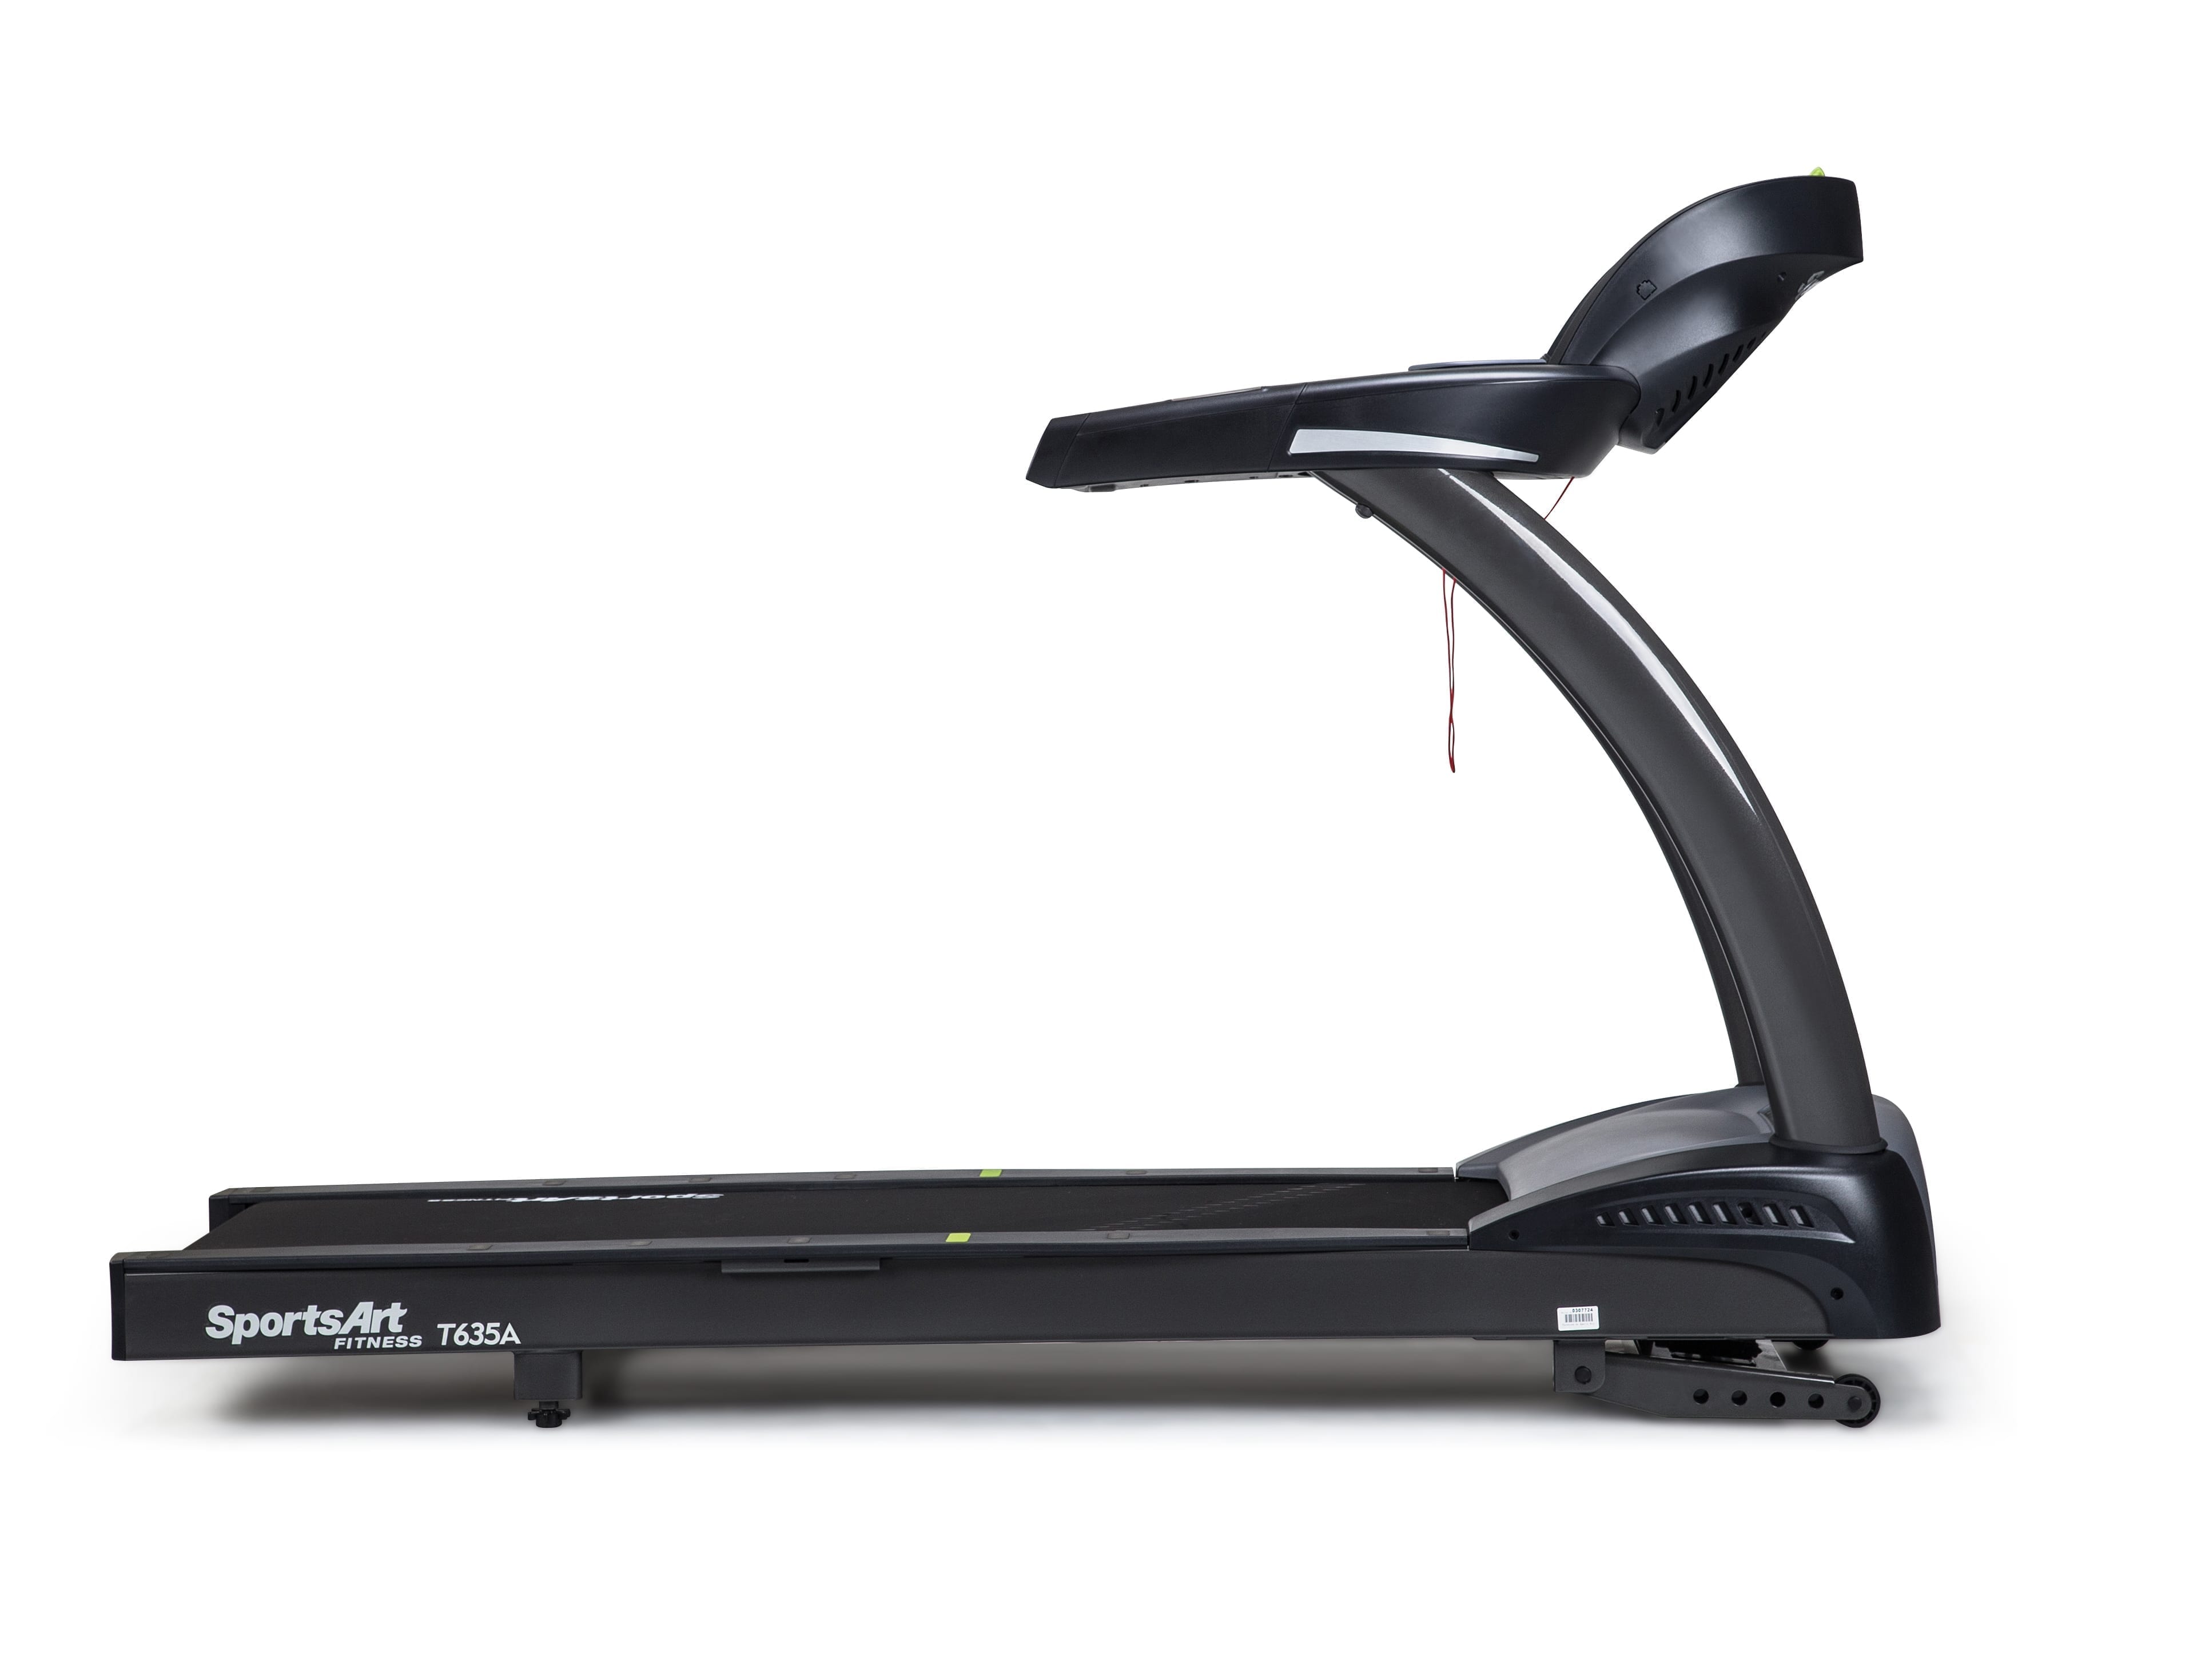 SportsArt Foundation Ac Motor Treadmill T635A side view